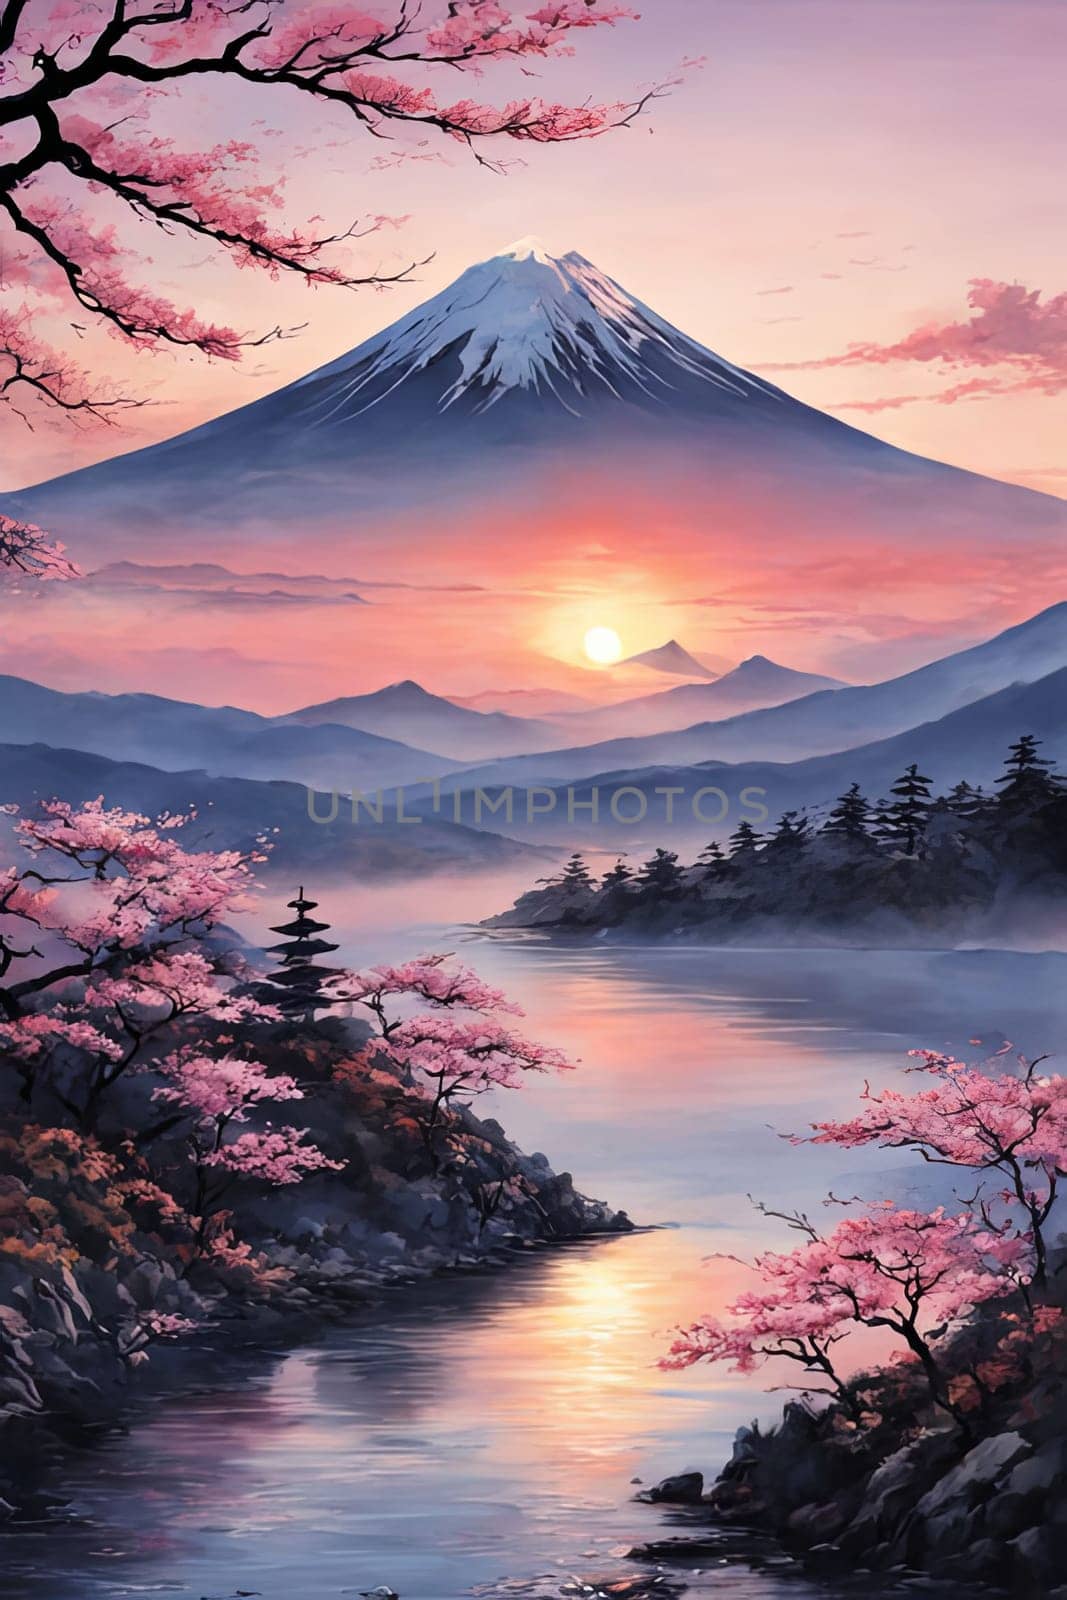 Mount Fuji range with red tree in foreground. For meditation apps, on covers of books about spiritual growth, in designs for yoga studios, spa salons, illustration for articles on inner peace, print